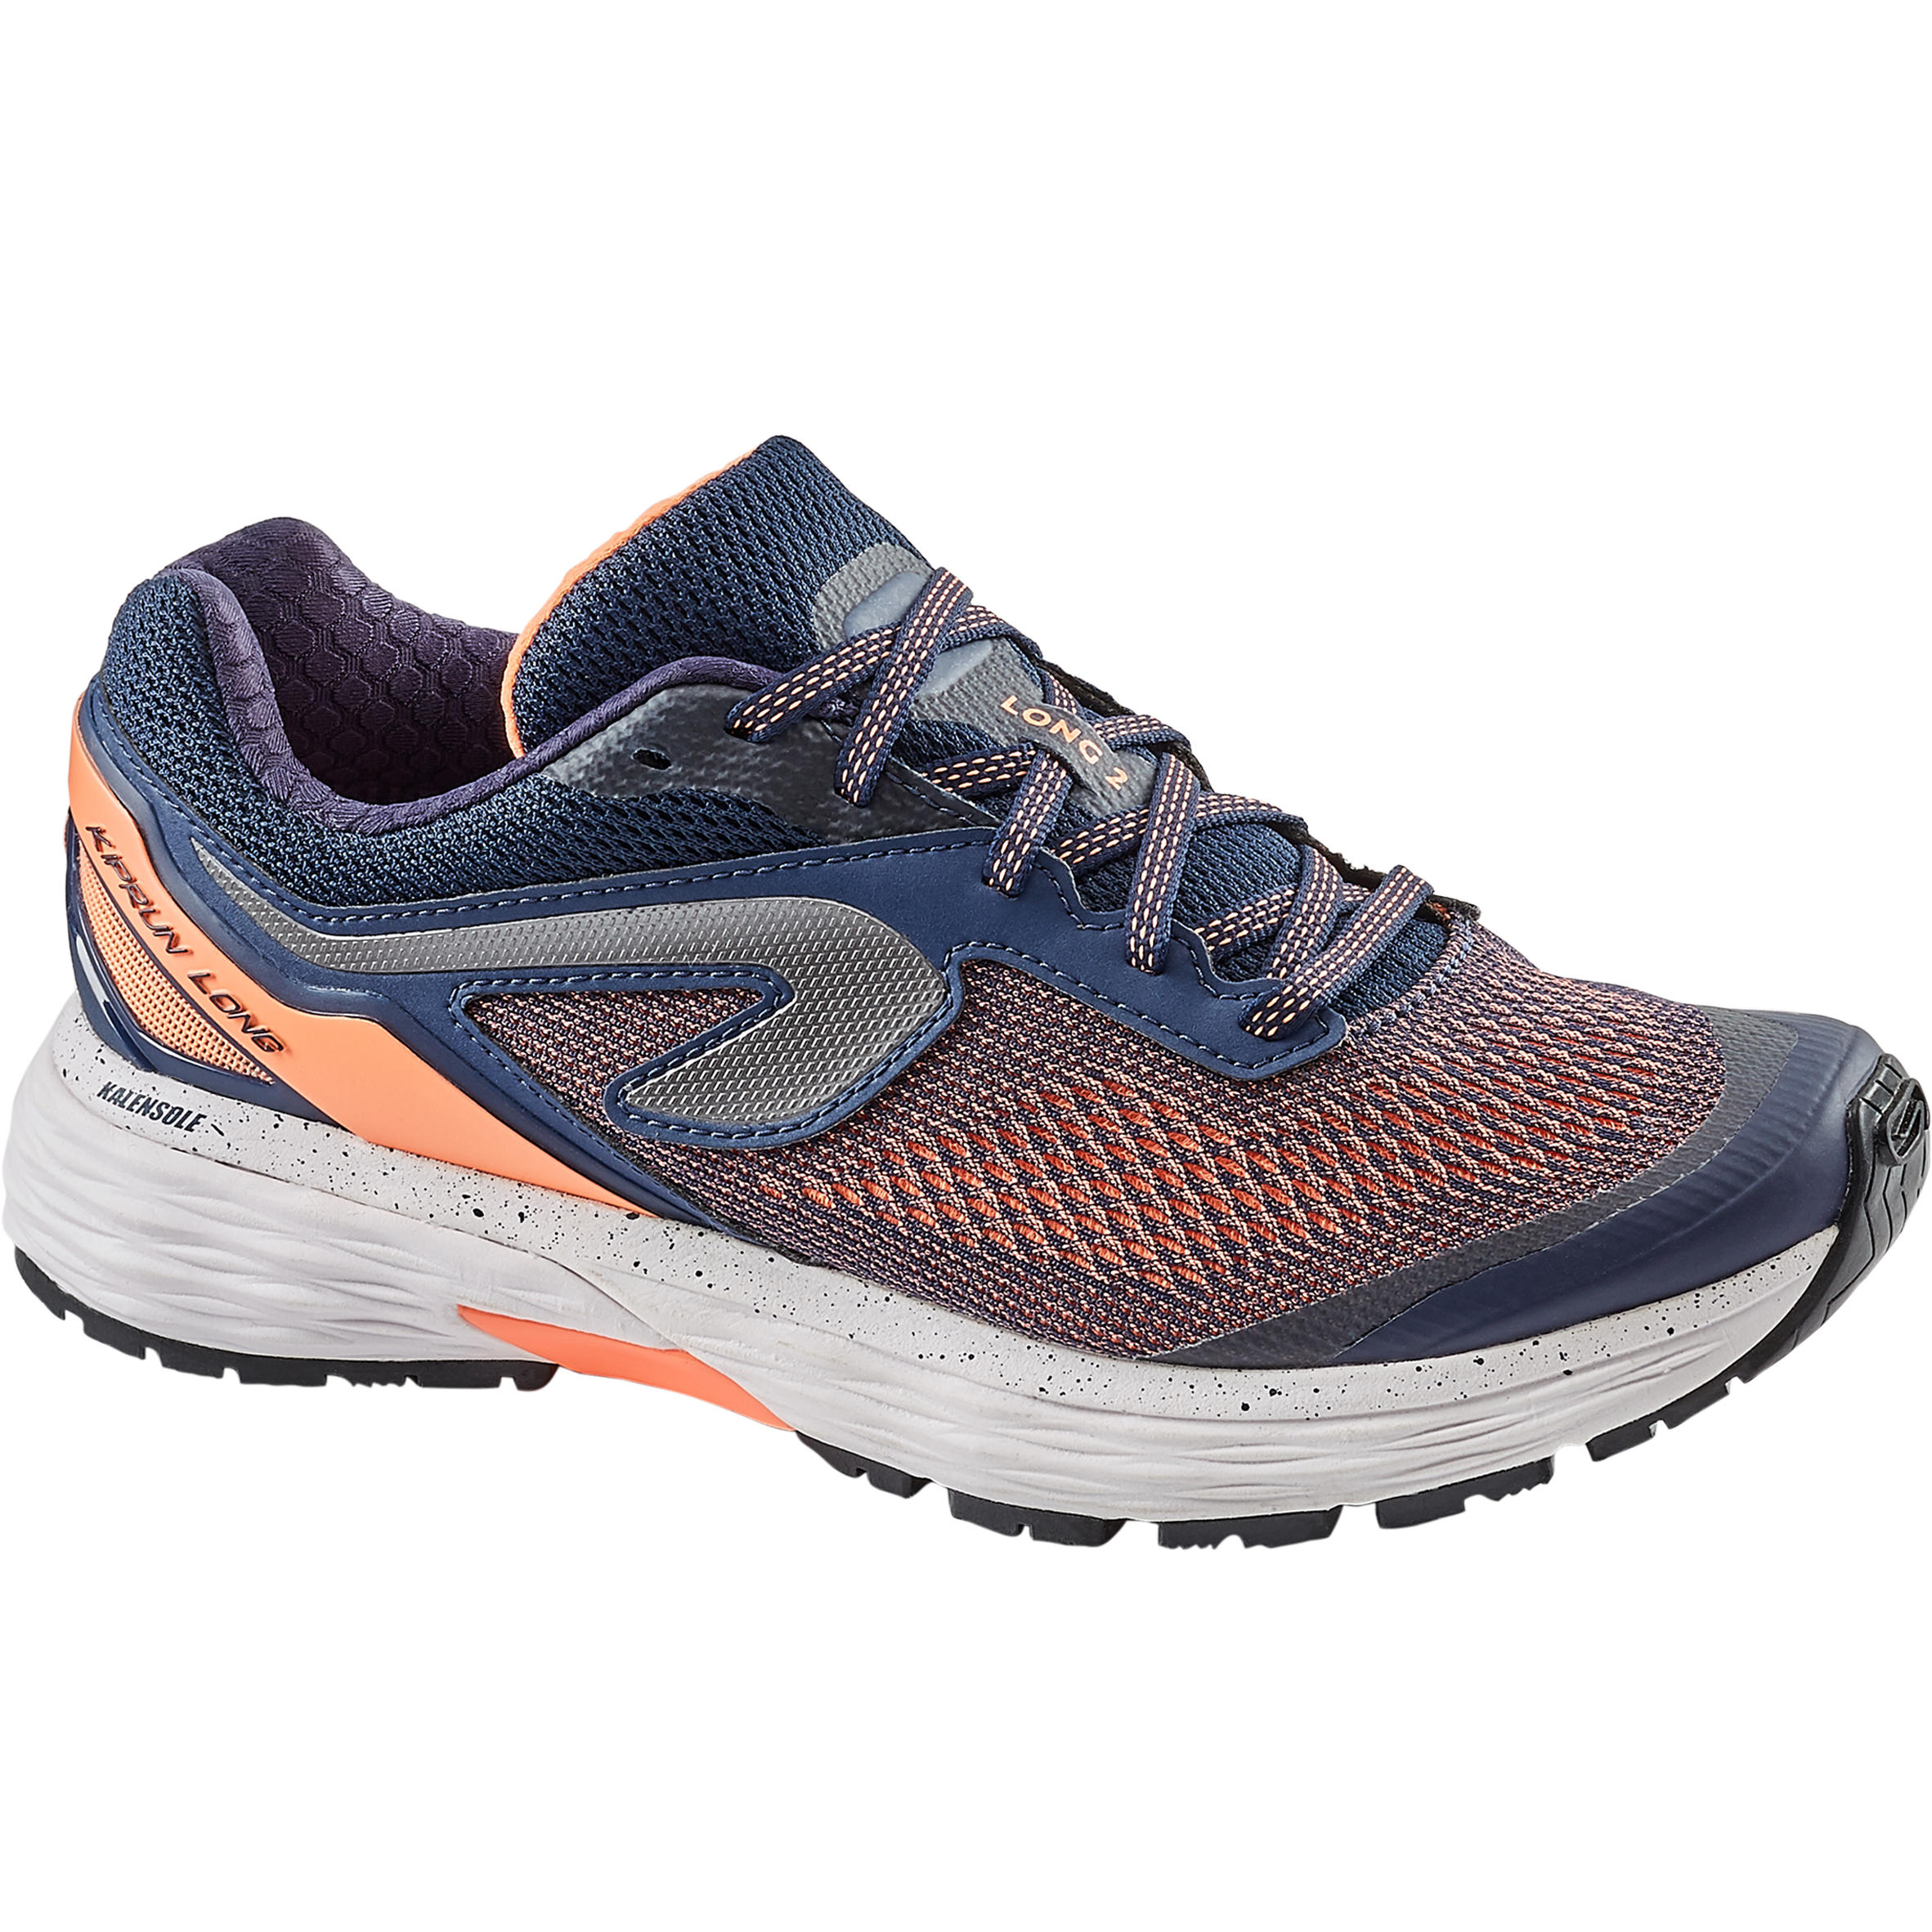 Long 2 Women's Running Shoes - Coral Blue 1/9